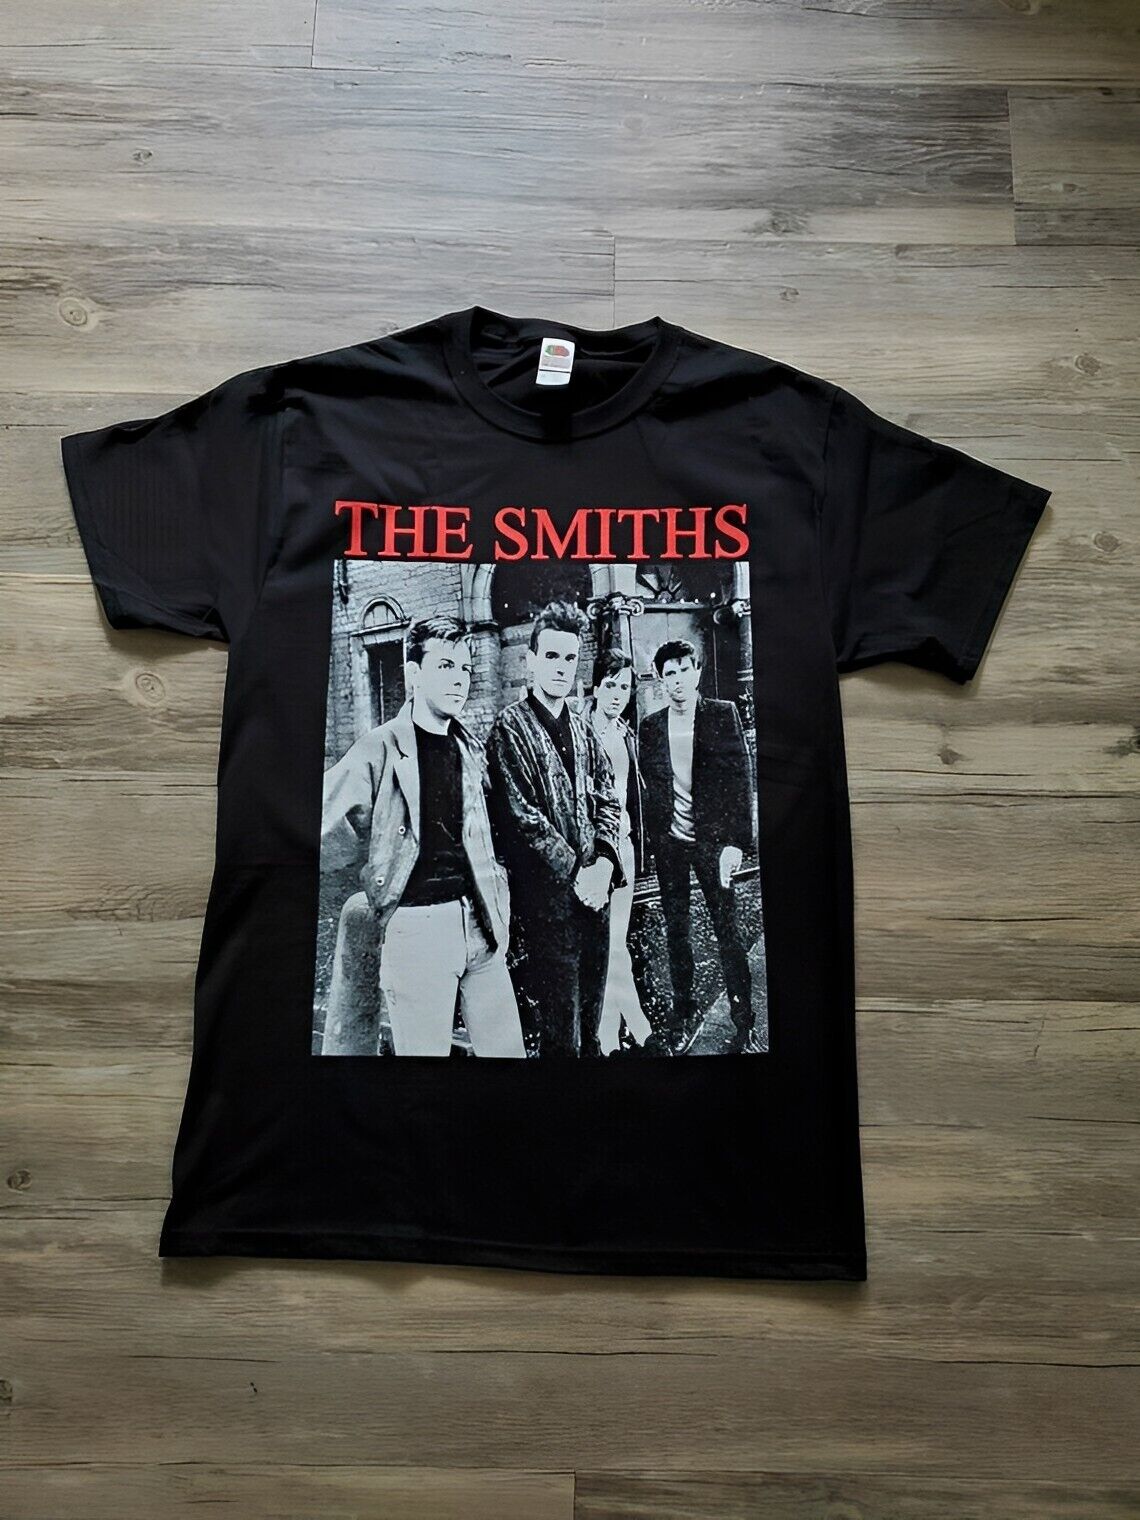 The Smiths T-Shirt, Vintage The Smiths Shirt, Vintage The Smiths 